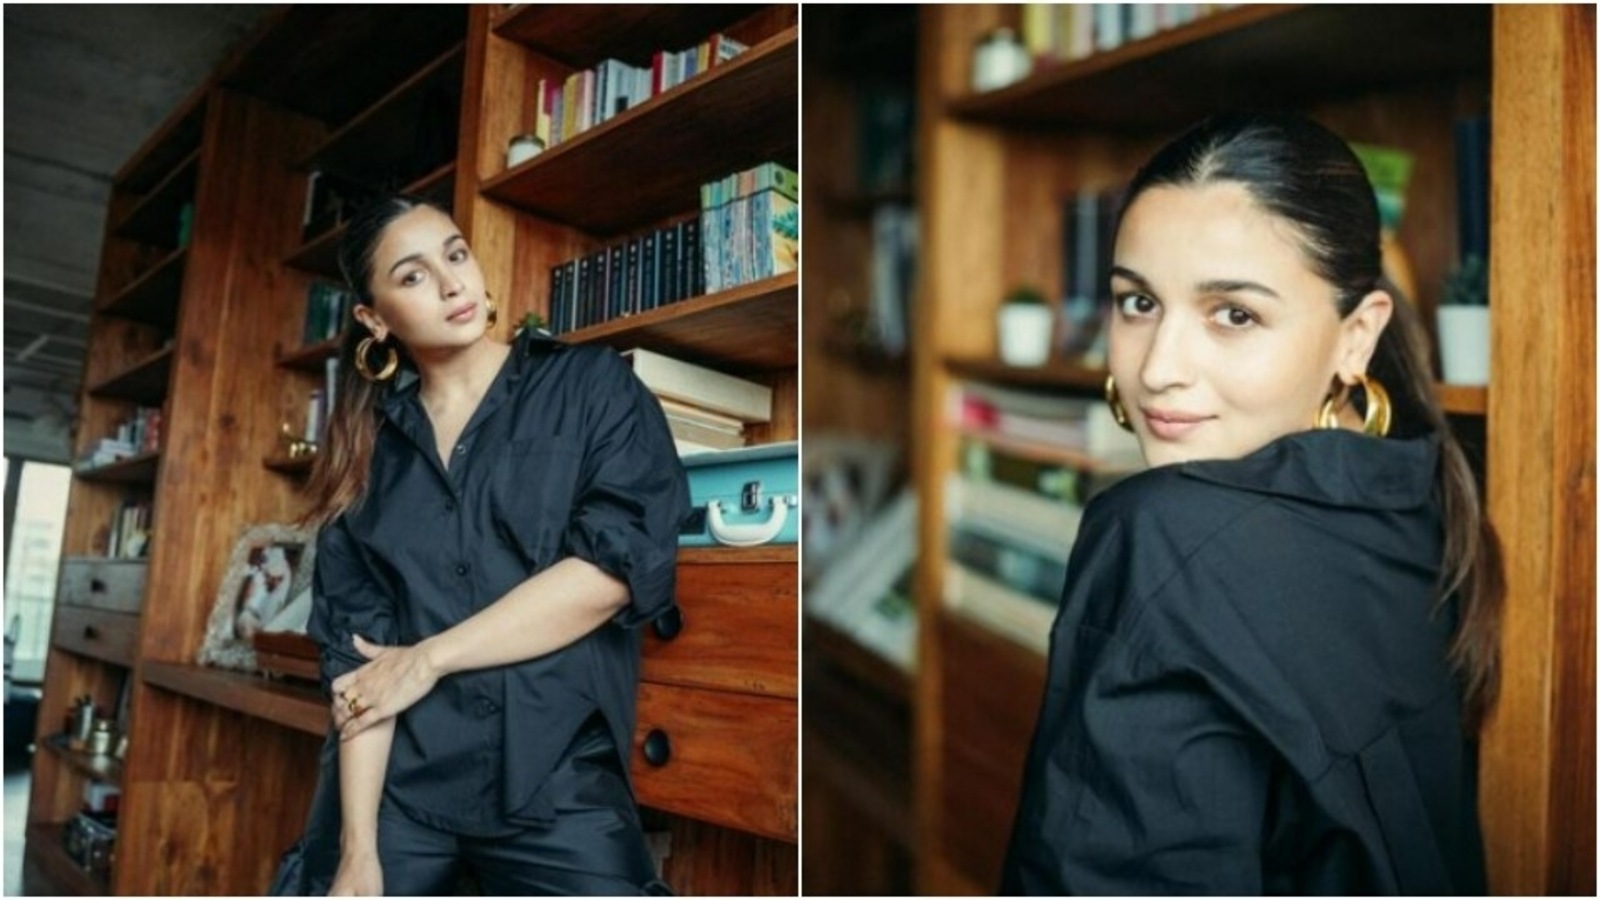 Mom-to-be Alia Bhatt, in an all-black ensemble, is owning pregnancy fashion